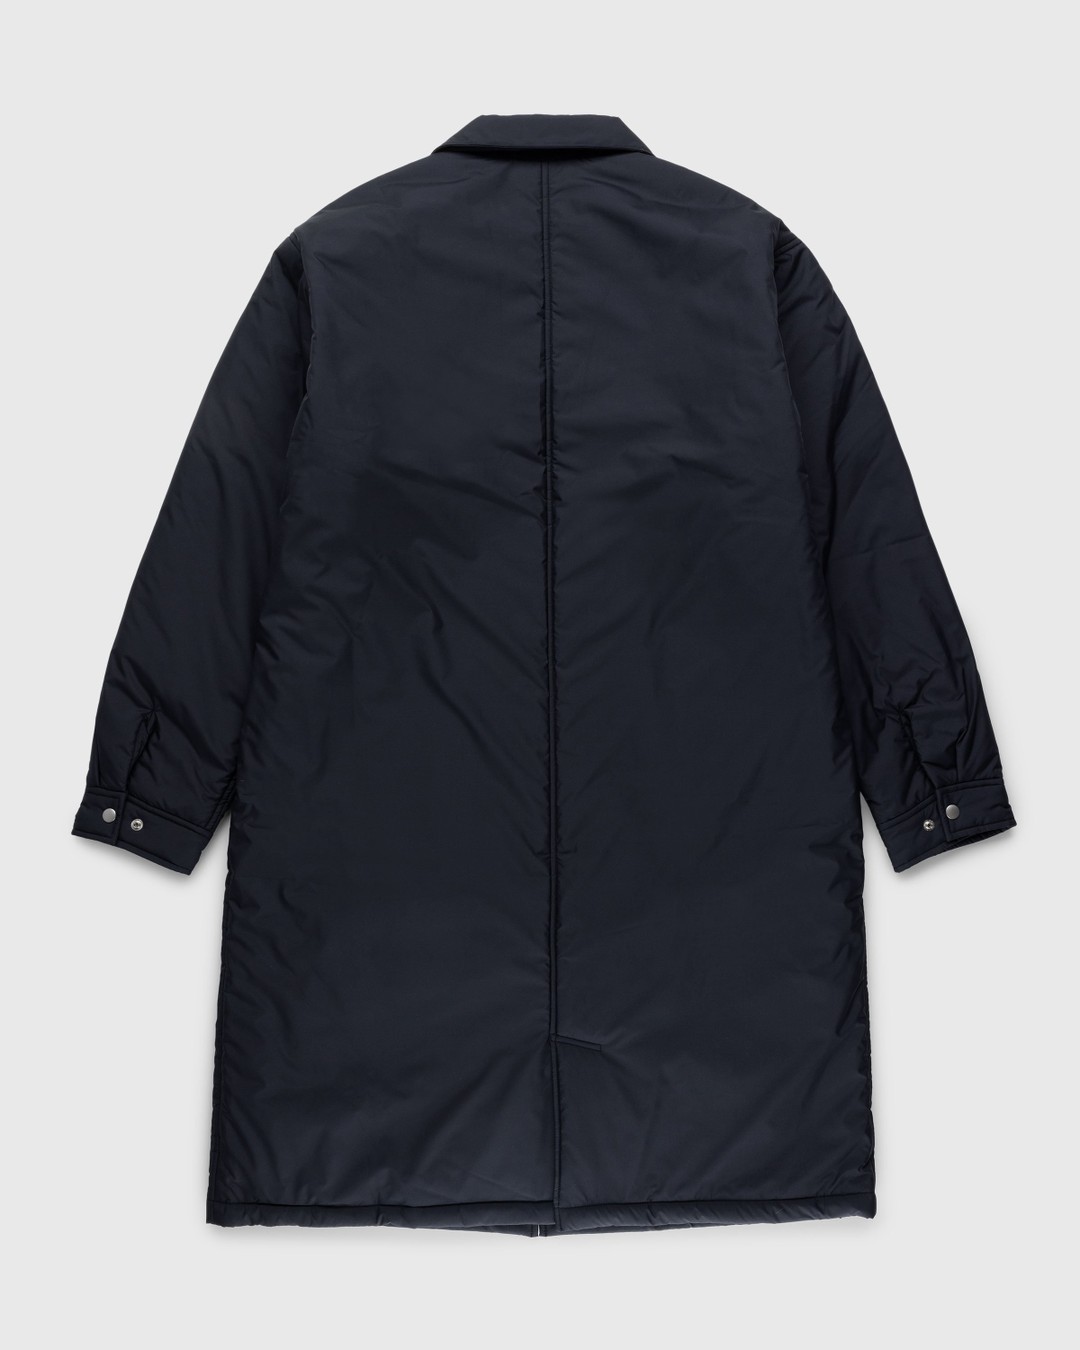 Highsnobiety HS05 – Light Insulated Eco-Poly Trench Coat Black - Outerwear - Black - Image 2